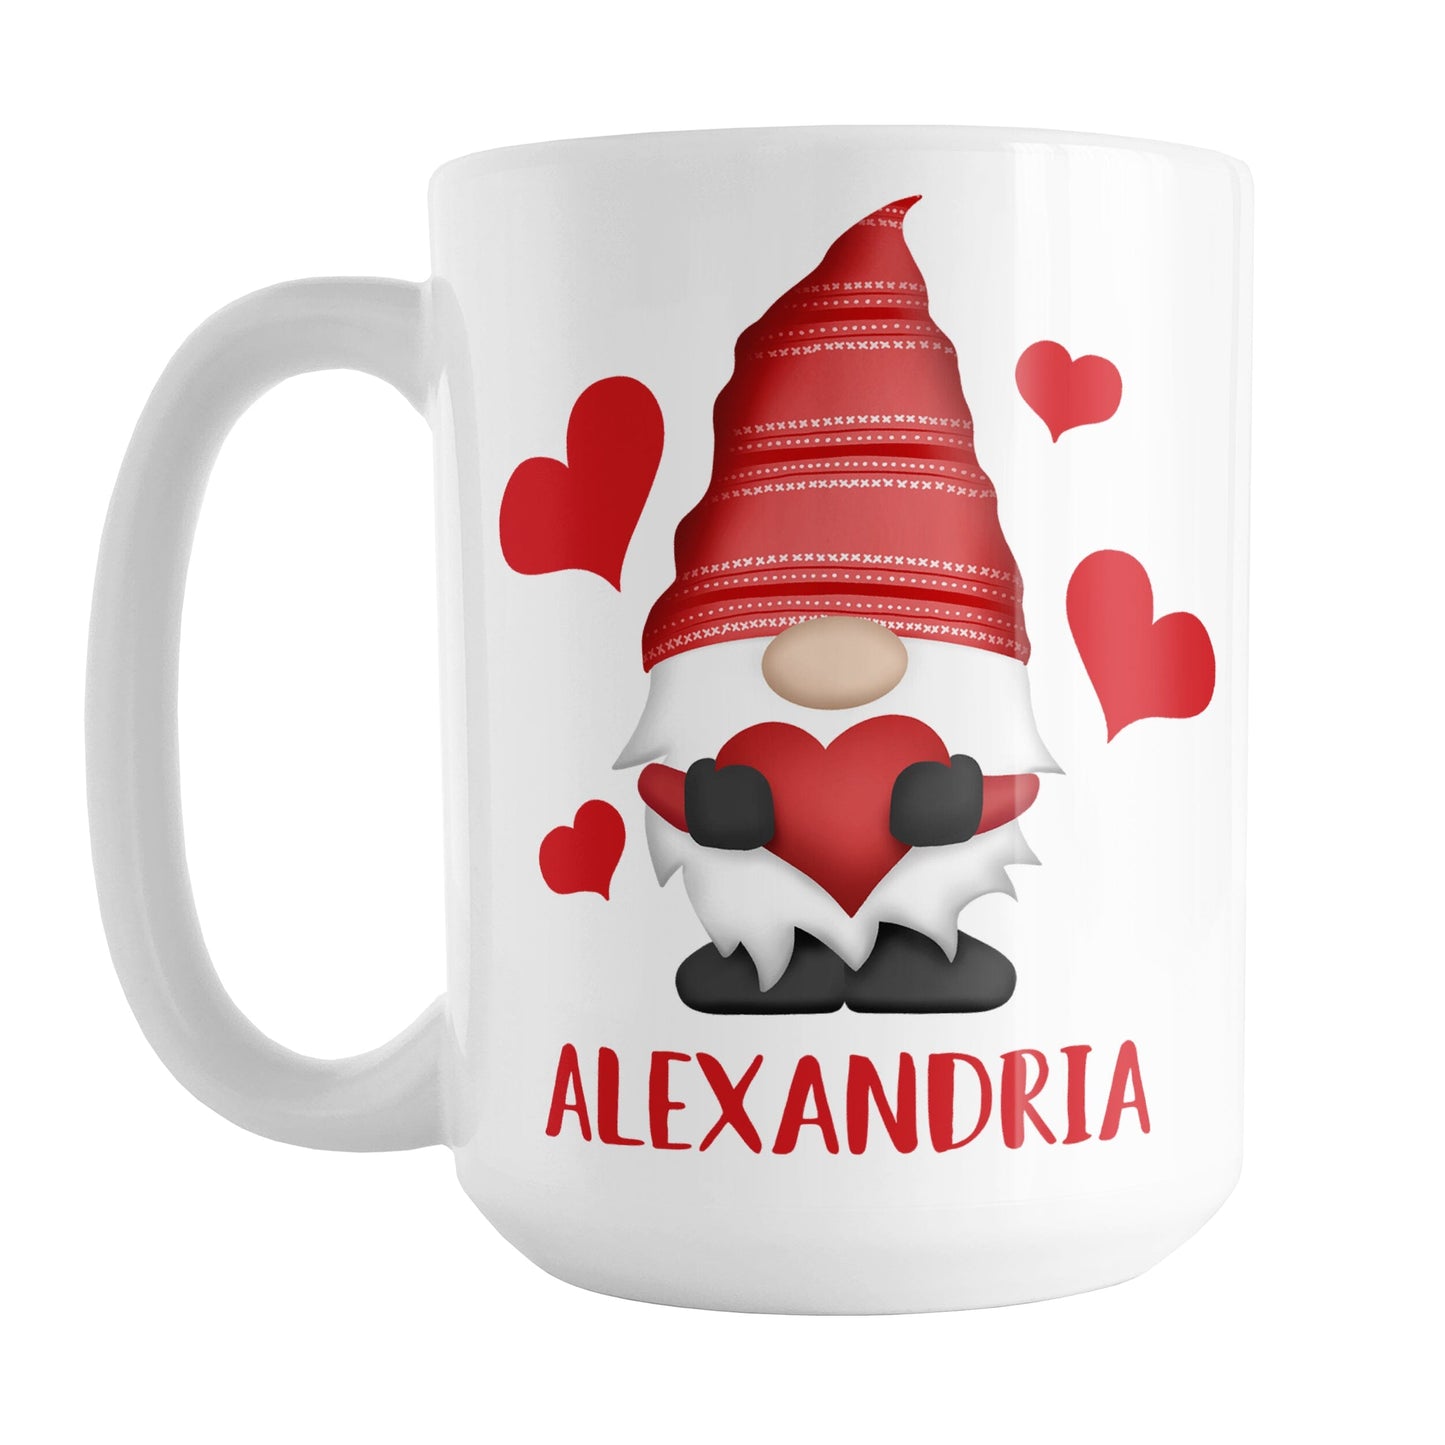 Personalized Red Heart Gnome Mug (15oz) at Amy's Coffee Mugs. A ceramic coffee mug designed with an illustration of an adorable gnome with a red pointed hat, holding a big red heart, with bold red hearts around it. Below the gnome is your personalized name custom printed in a cute red font. This charming gnome and personalized name are printed on both sides of the mug.